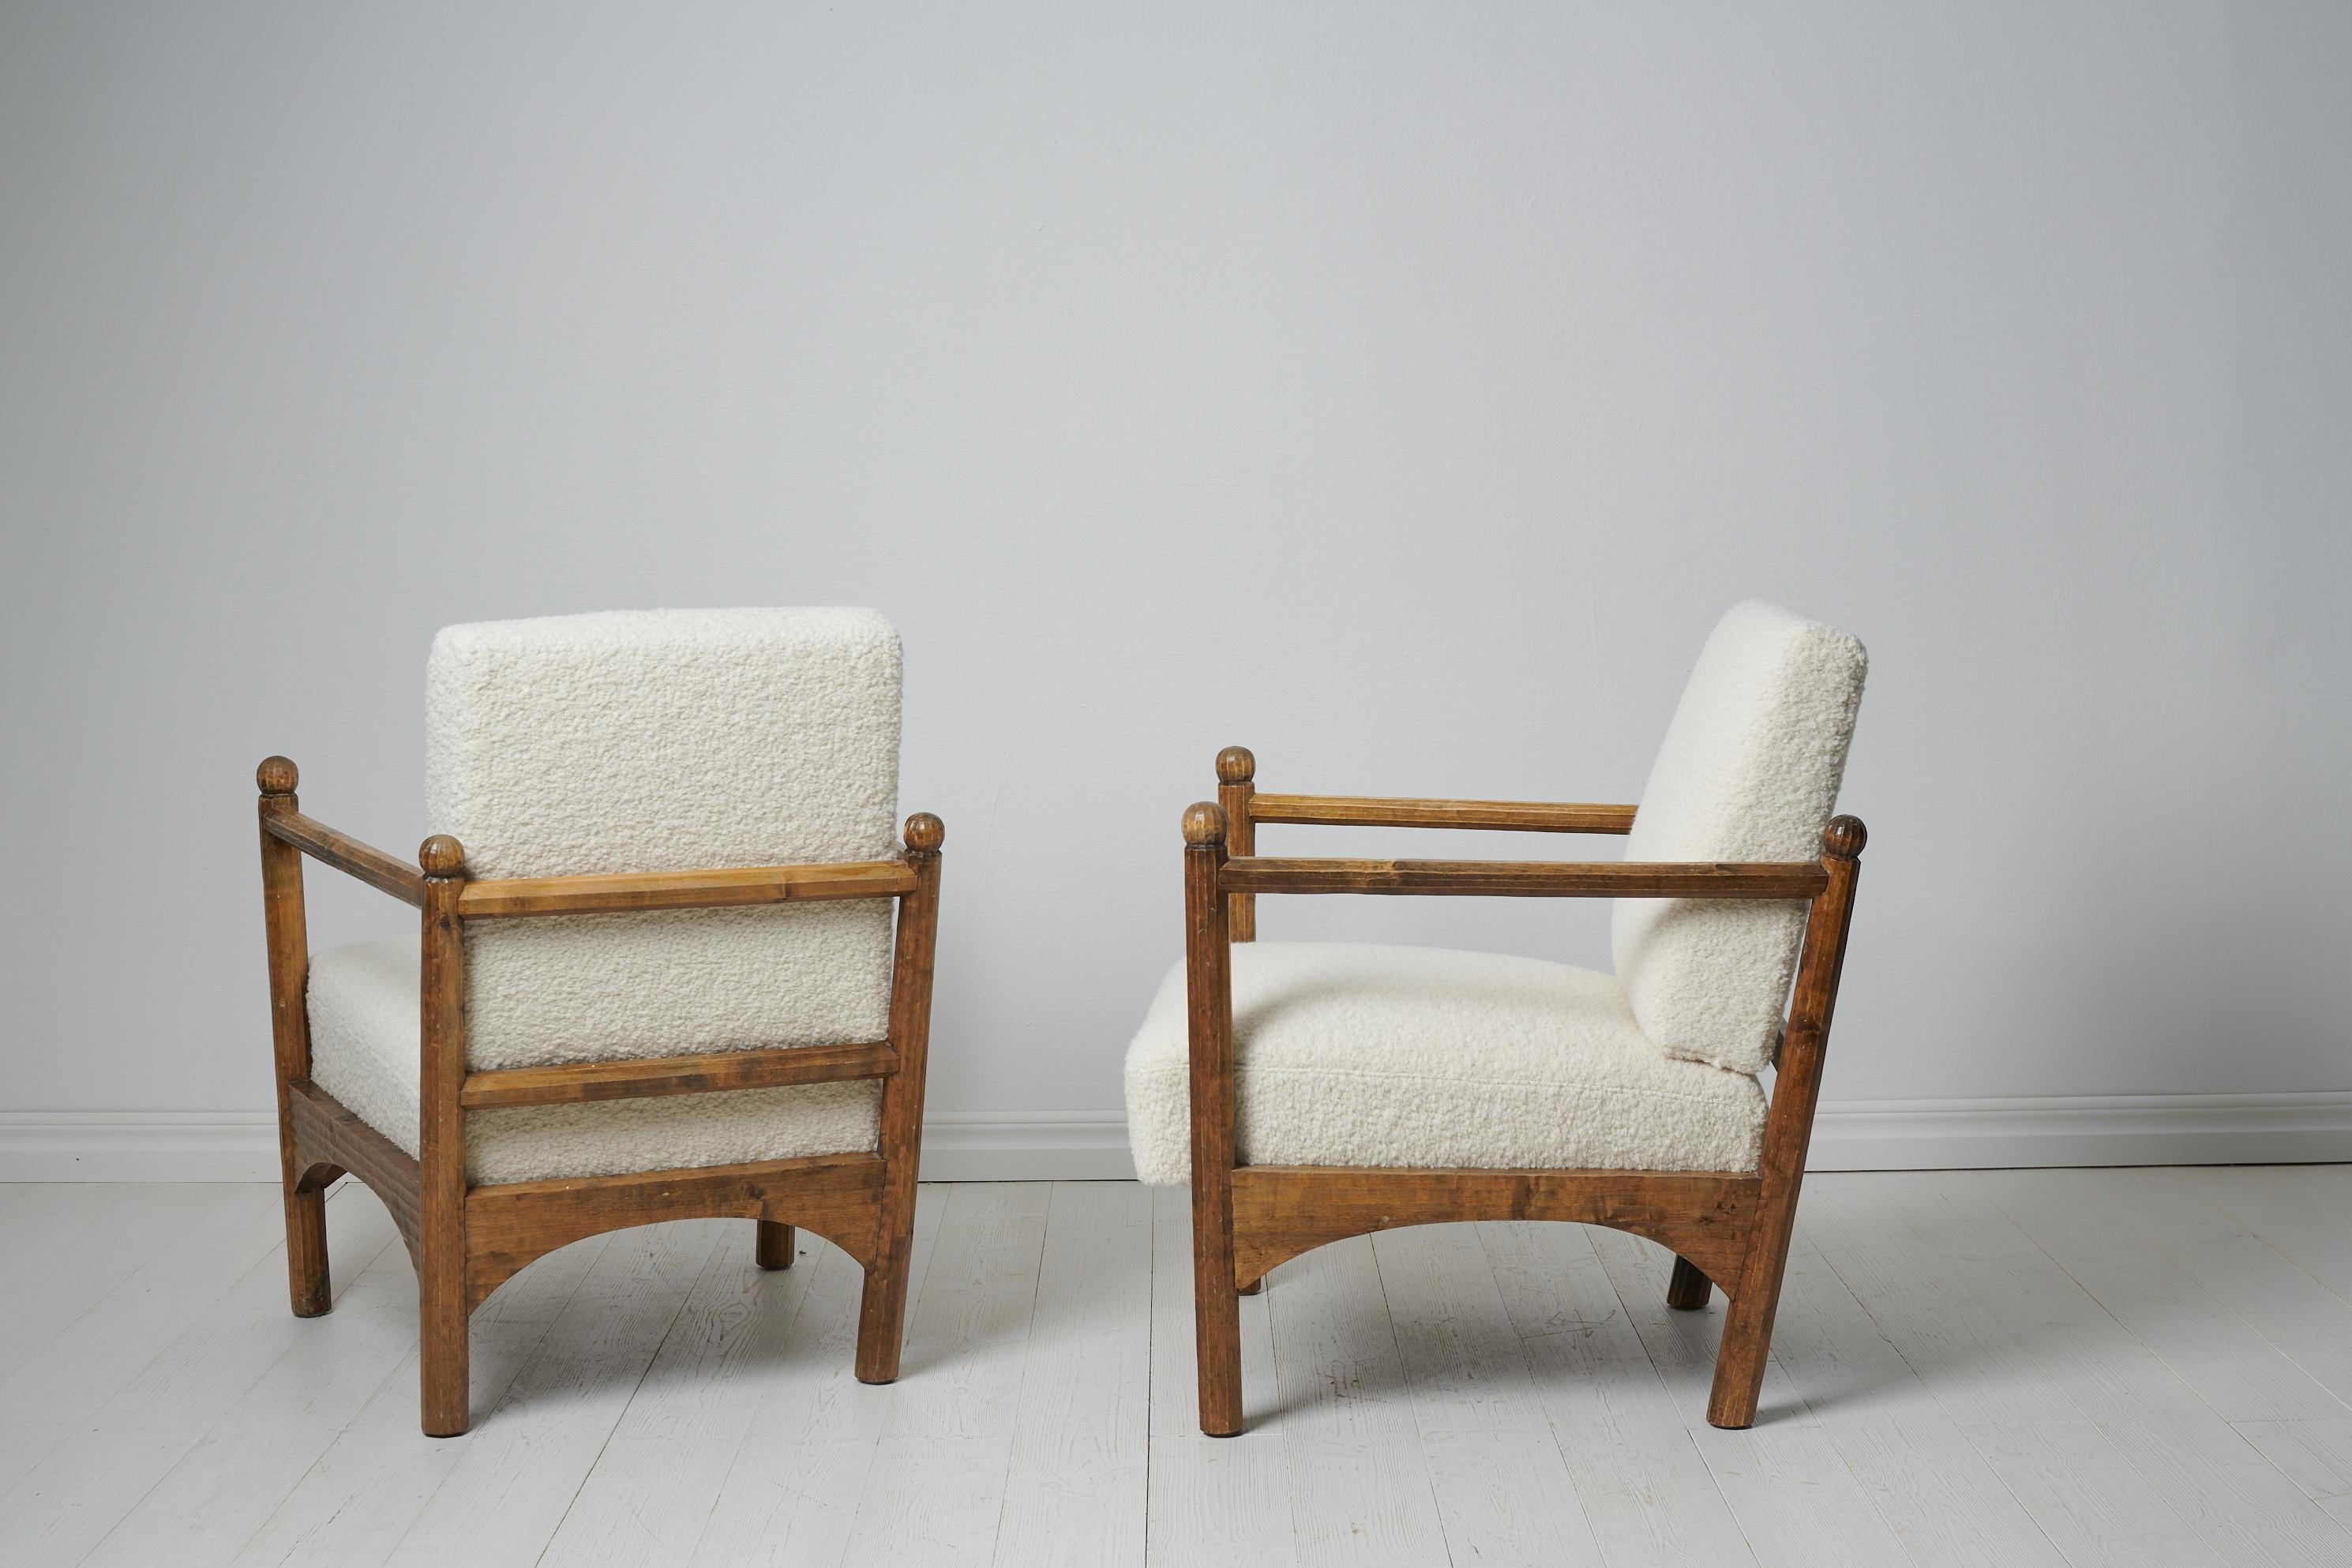 Swedish Grace Unusual Upholstered Armchairs In Good Condition For Sale In Kramfors, SE